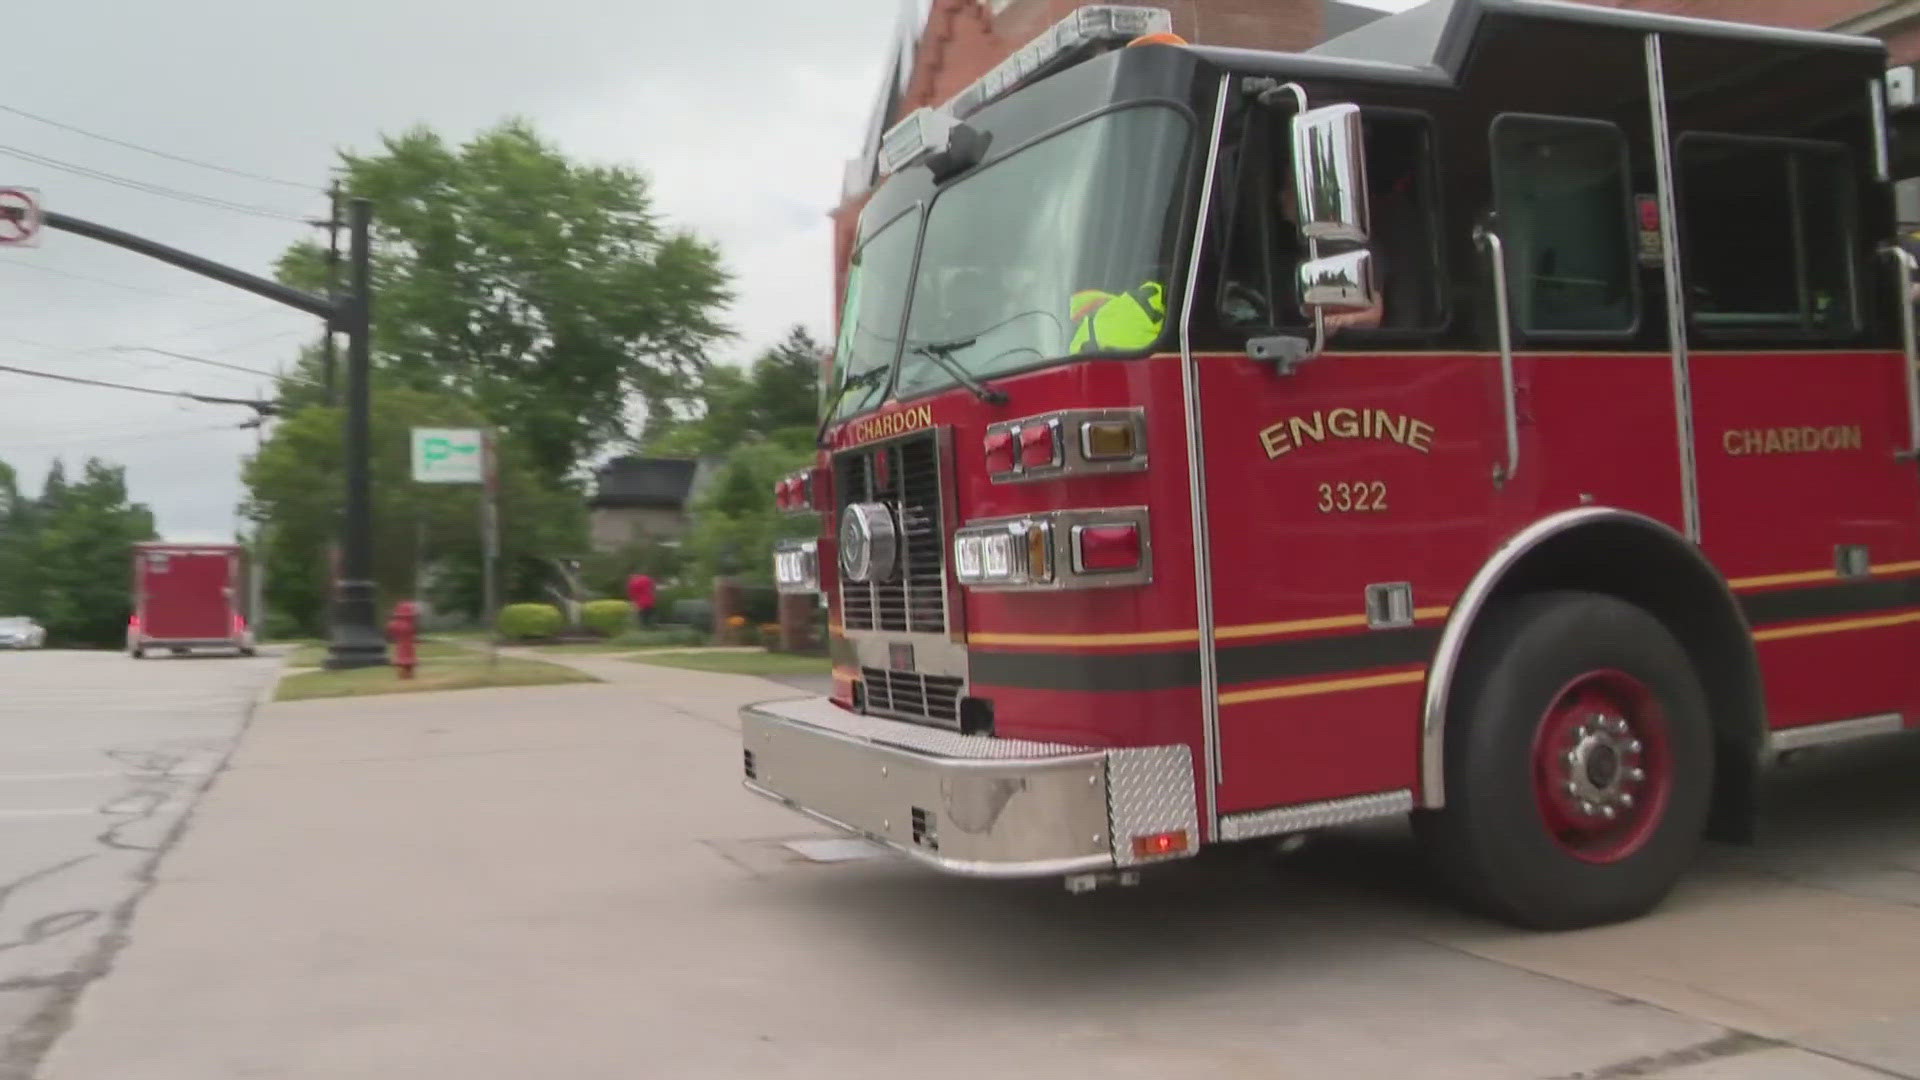 Fire departments across Ohio have been dealing with a tricky situation: More calls for service, difficulties with staffing and increasing costs.